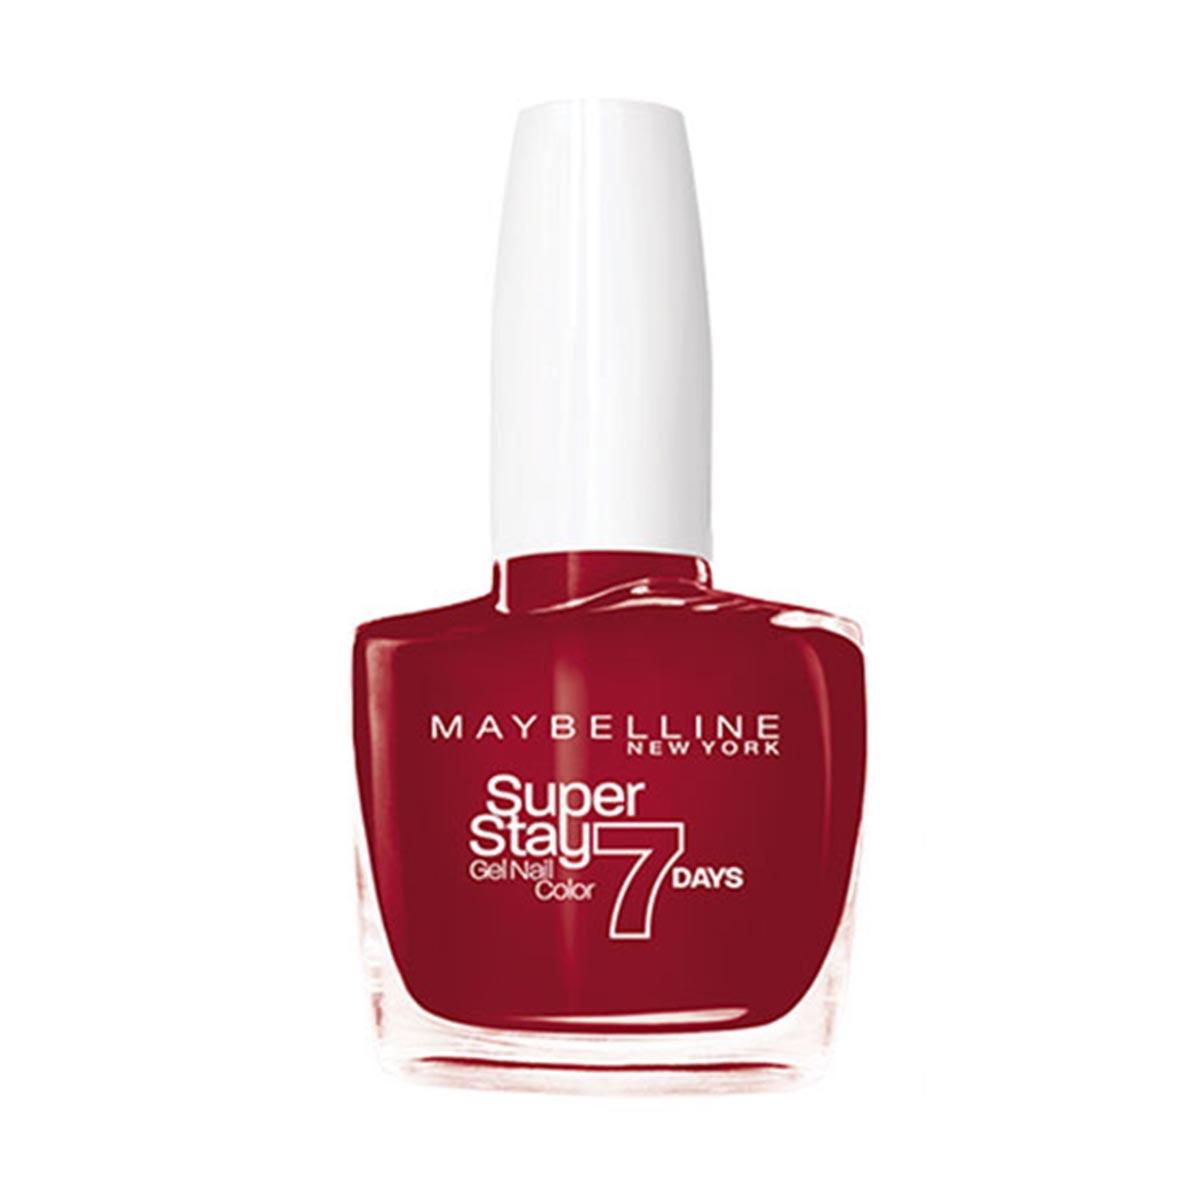 maybelline-superstay-gel-nail-color-7-days-006-deep-red